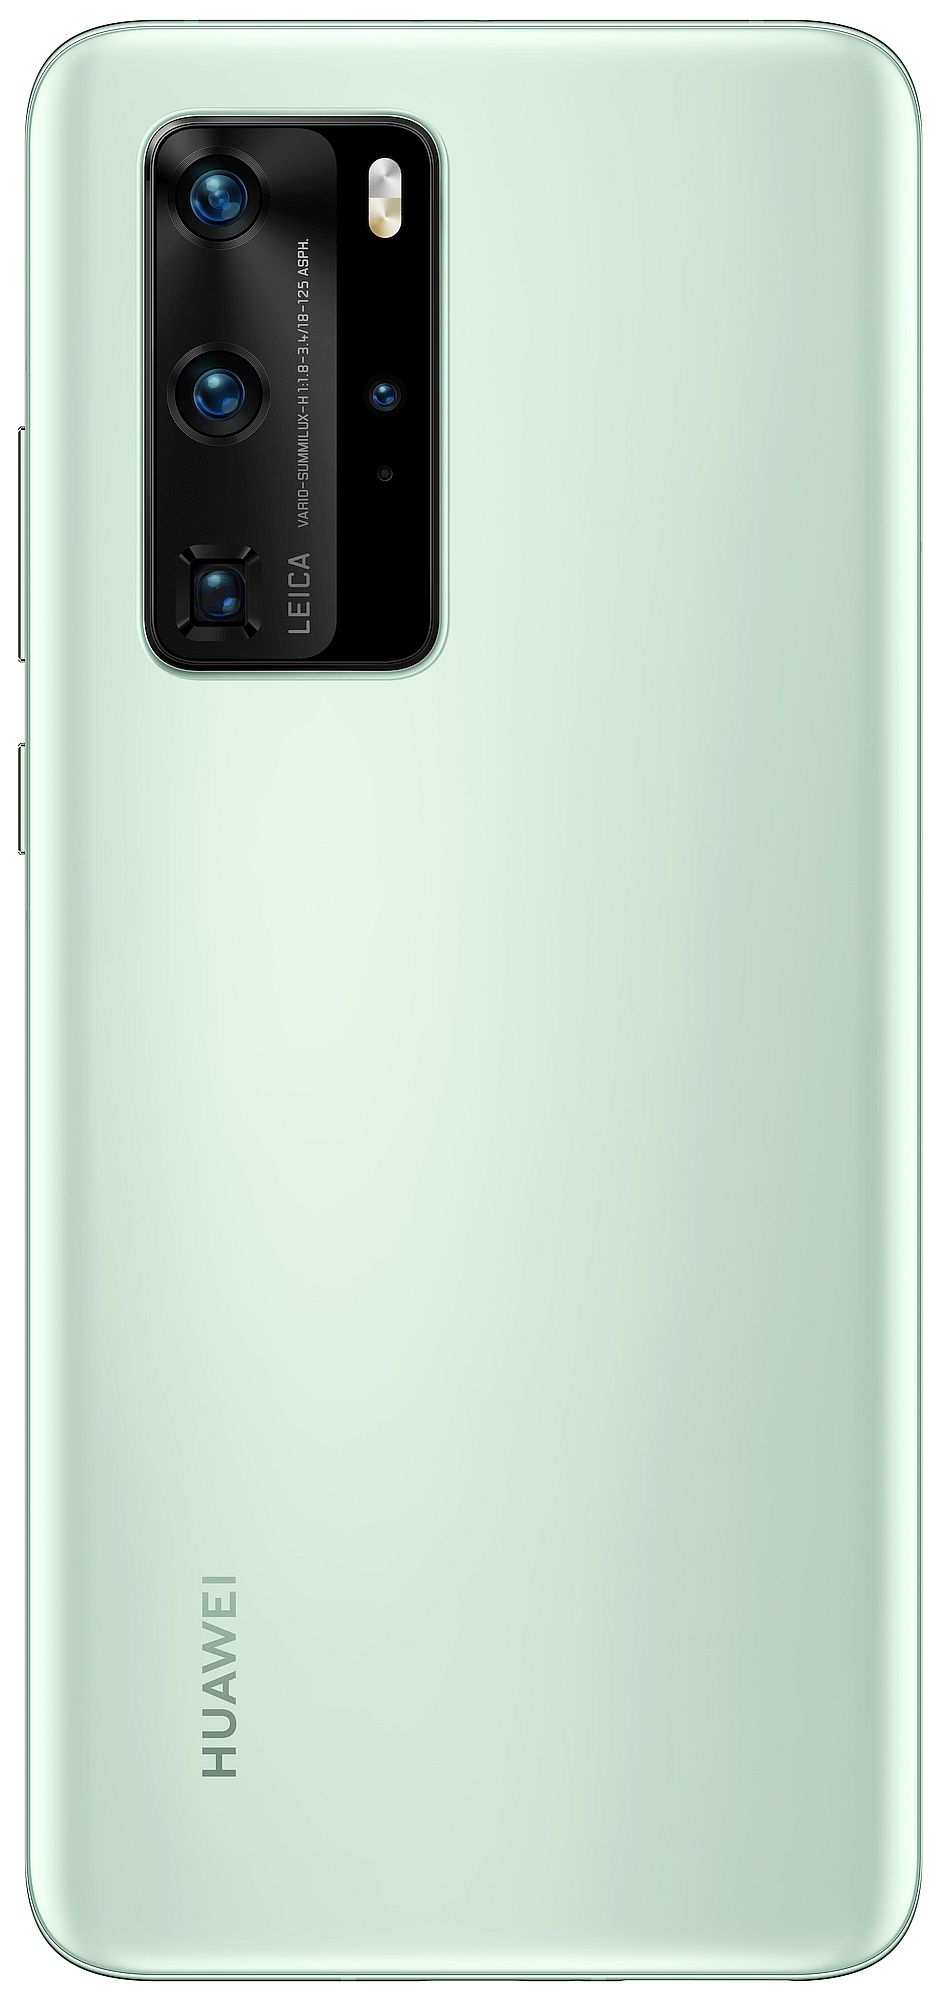 New information about Huawei P40 Pro leaks online